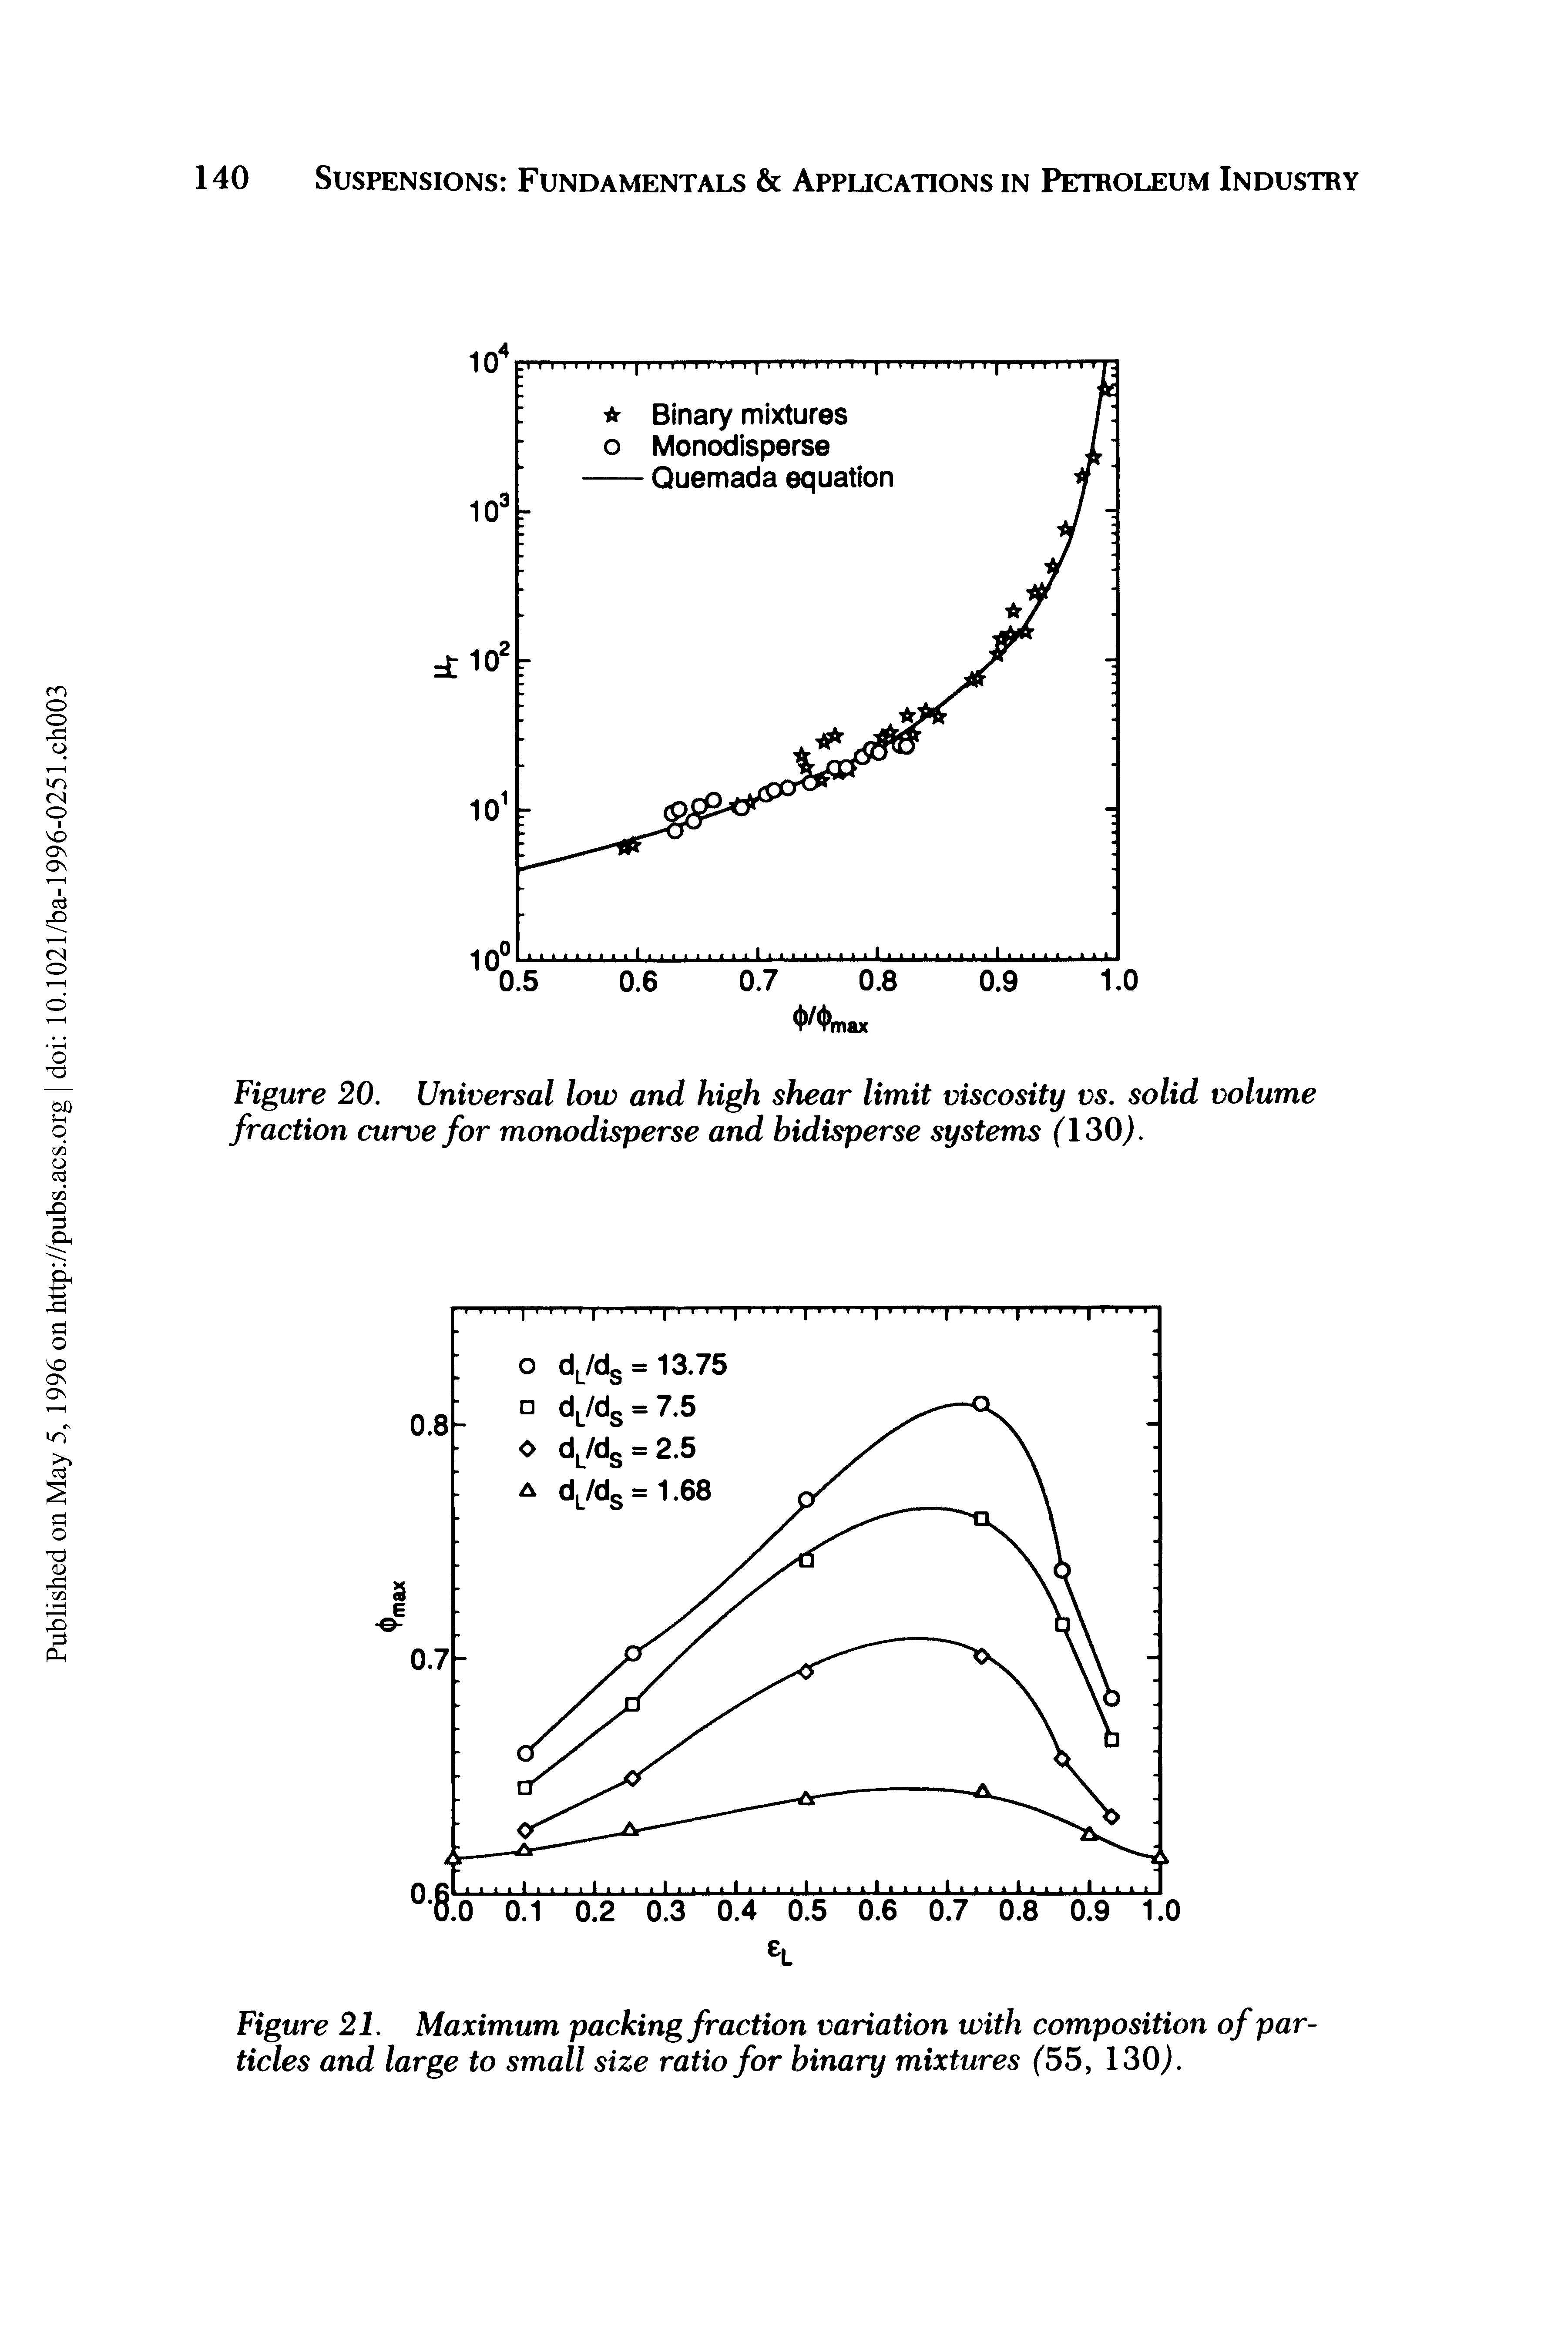 Figure 20. Universal low and high shear limit viscosity vs. solid volume fraction curve for monodisperse and hidisperse systems (130).